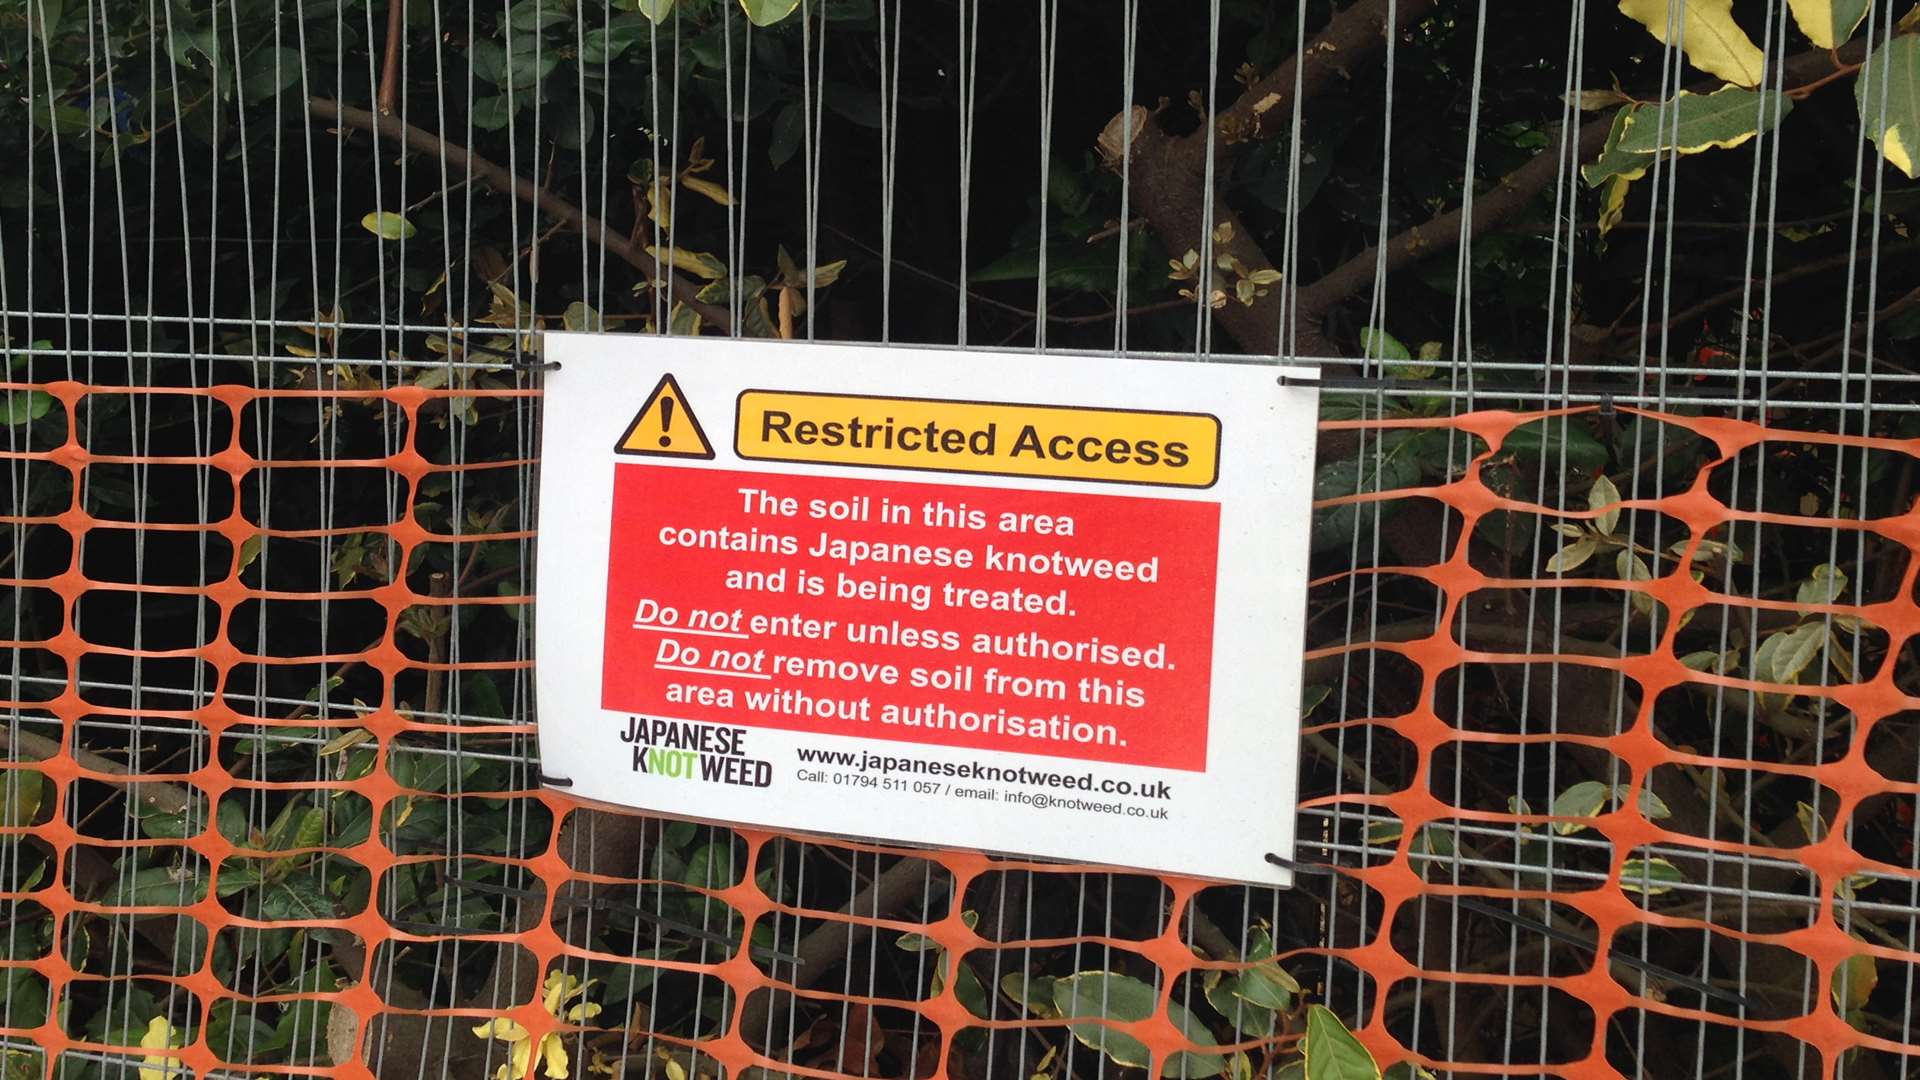 Japanese Knotweed Ltd are tackling the problem